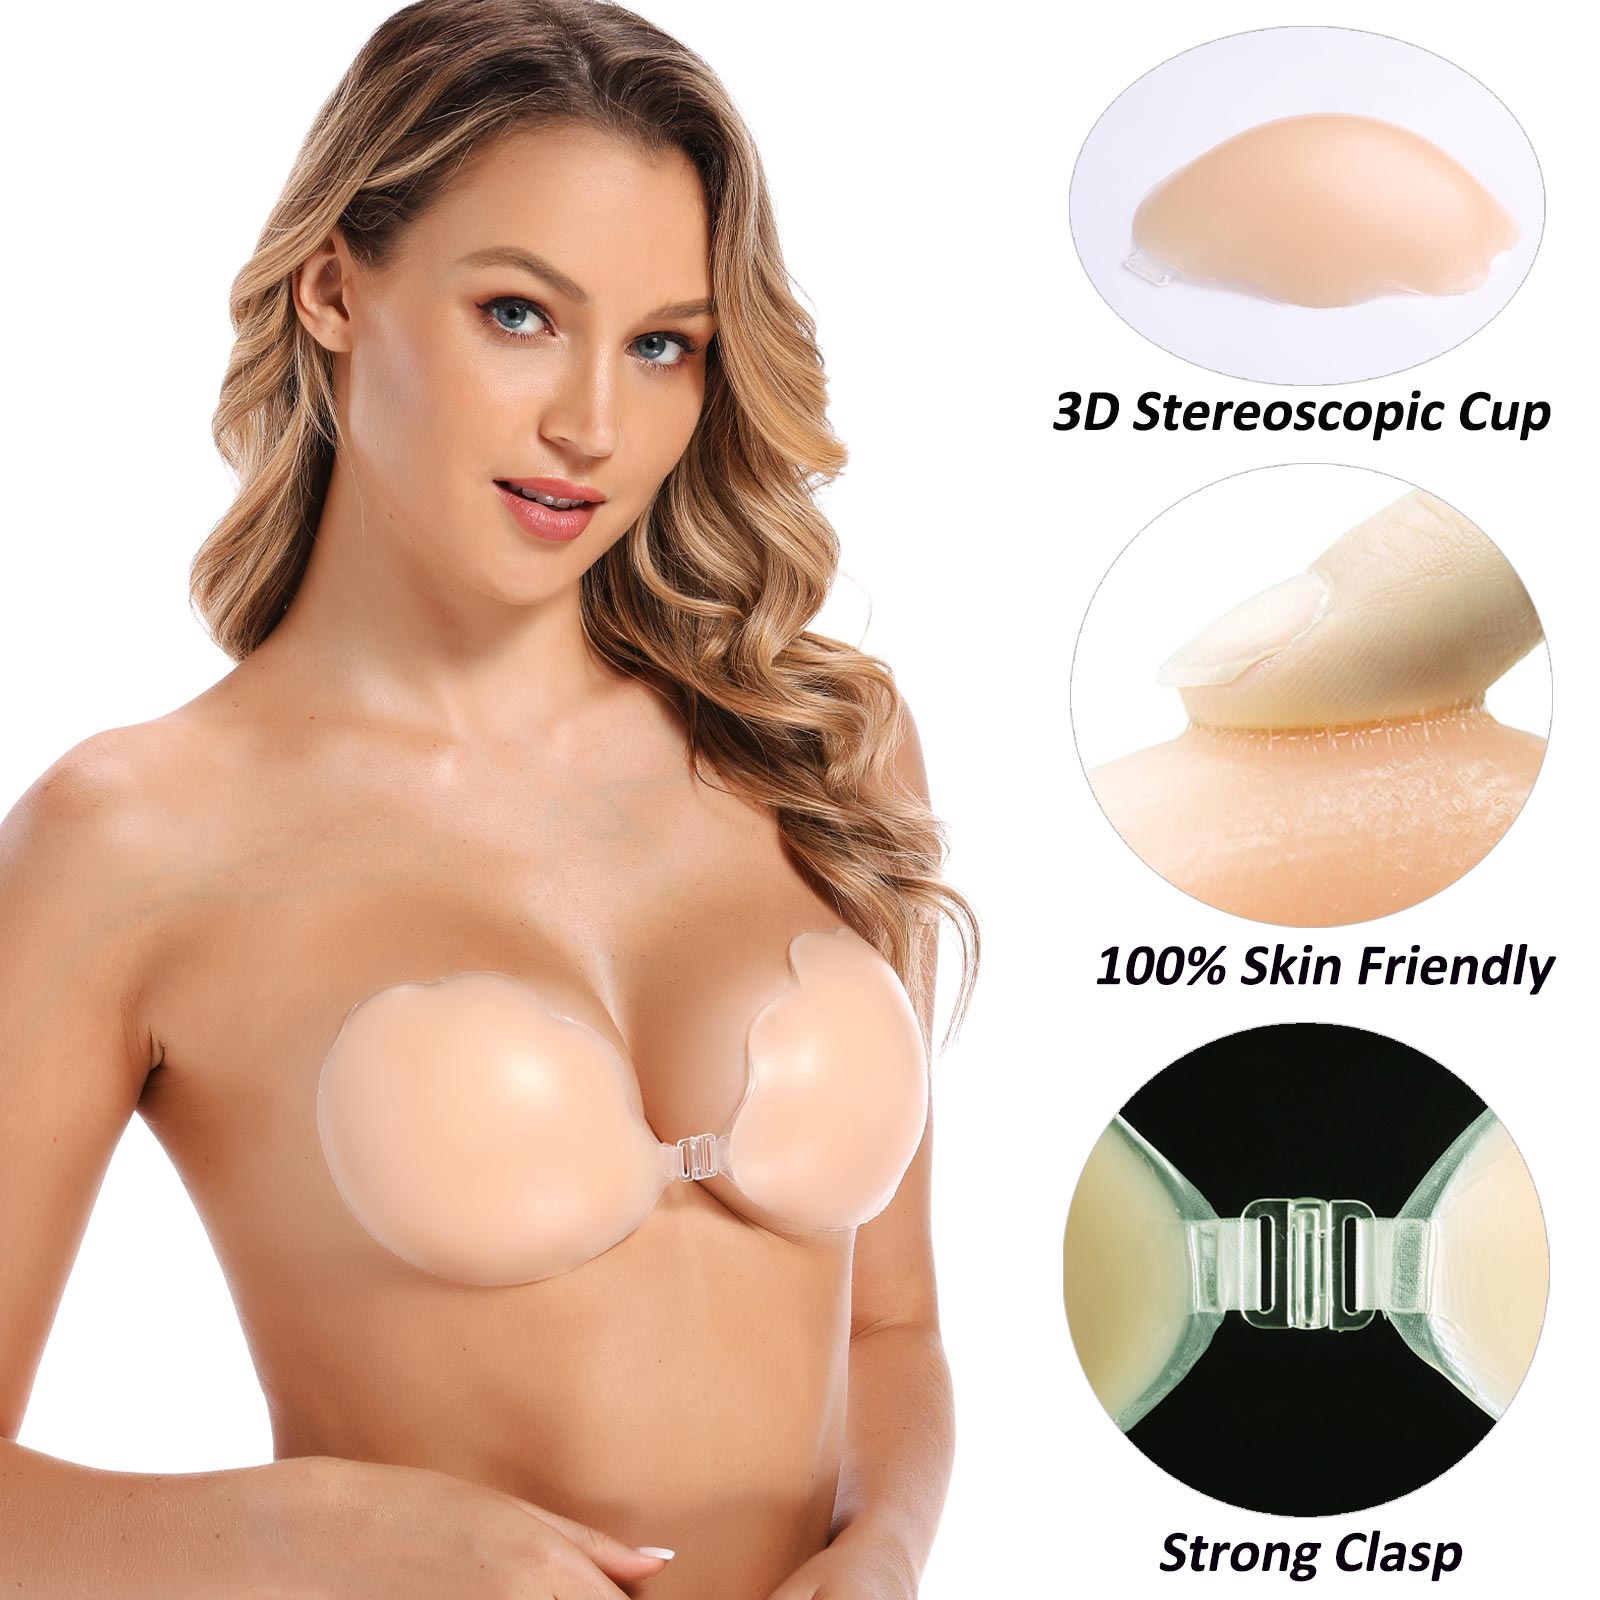 36 Sticky Bra Tape Images, Stock Photos, 3D objects, & Vectors